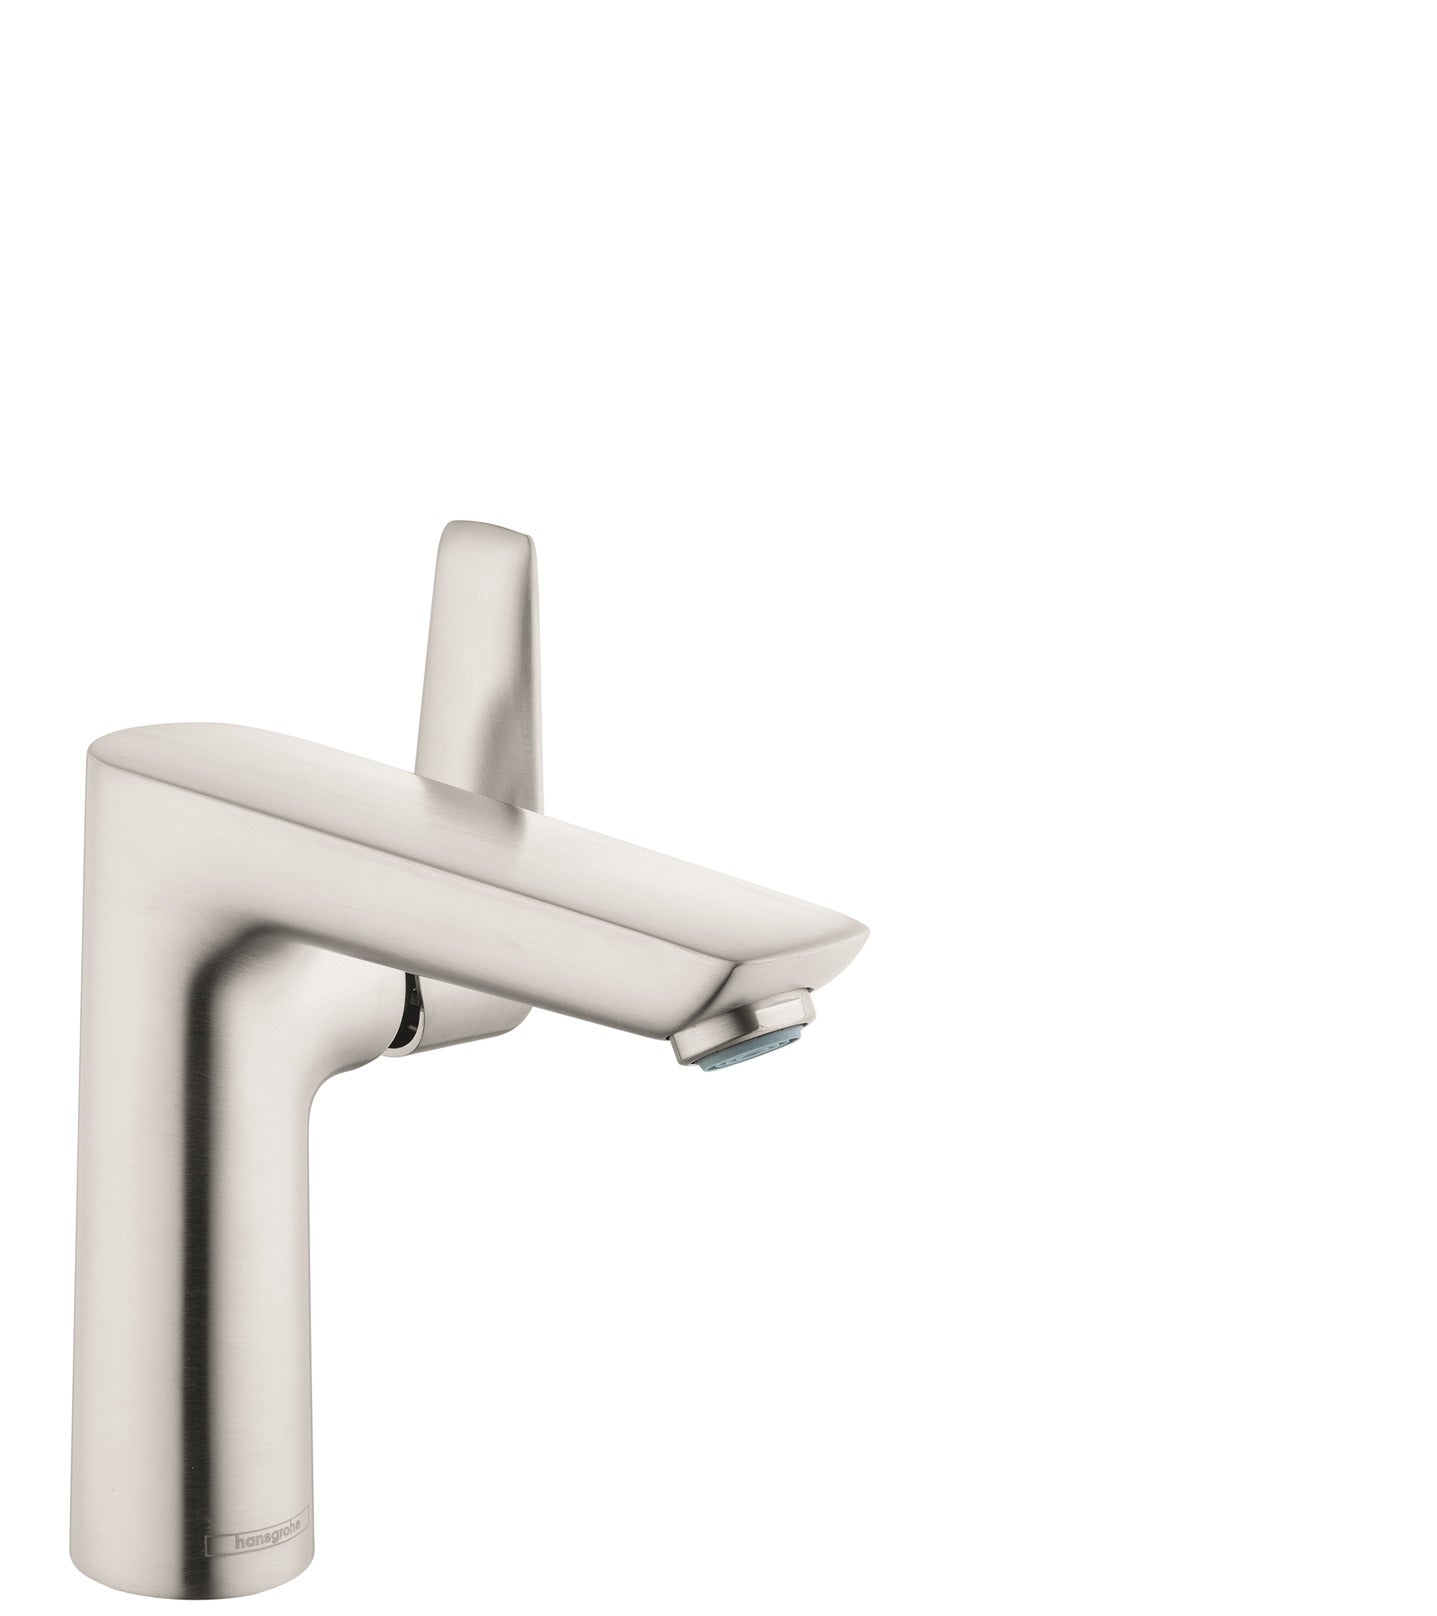 HANSGROHE 71754821 Brushed Nickel Talis E Modern Single Hole Bathroom Faucet 1.2 GPM